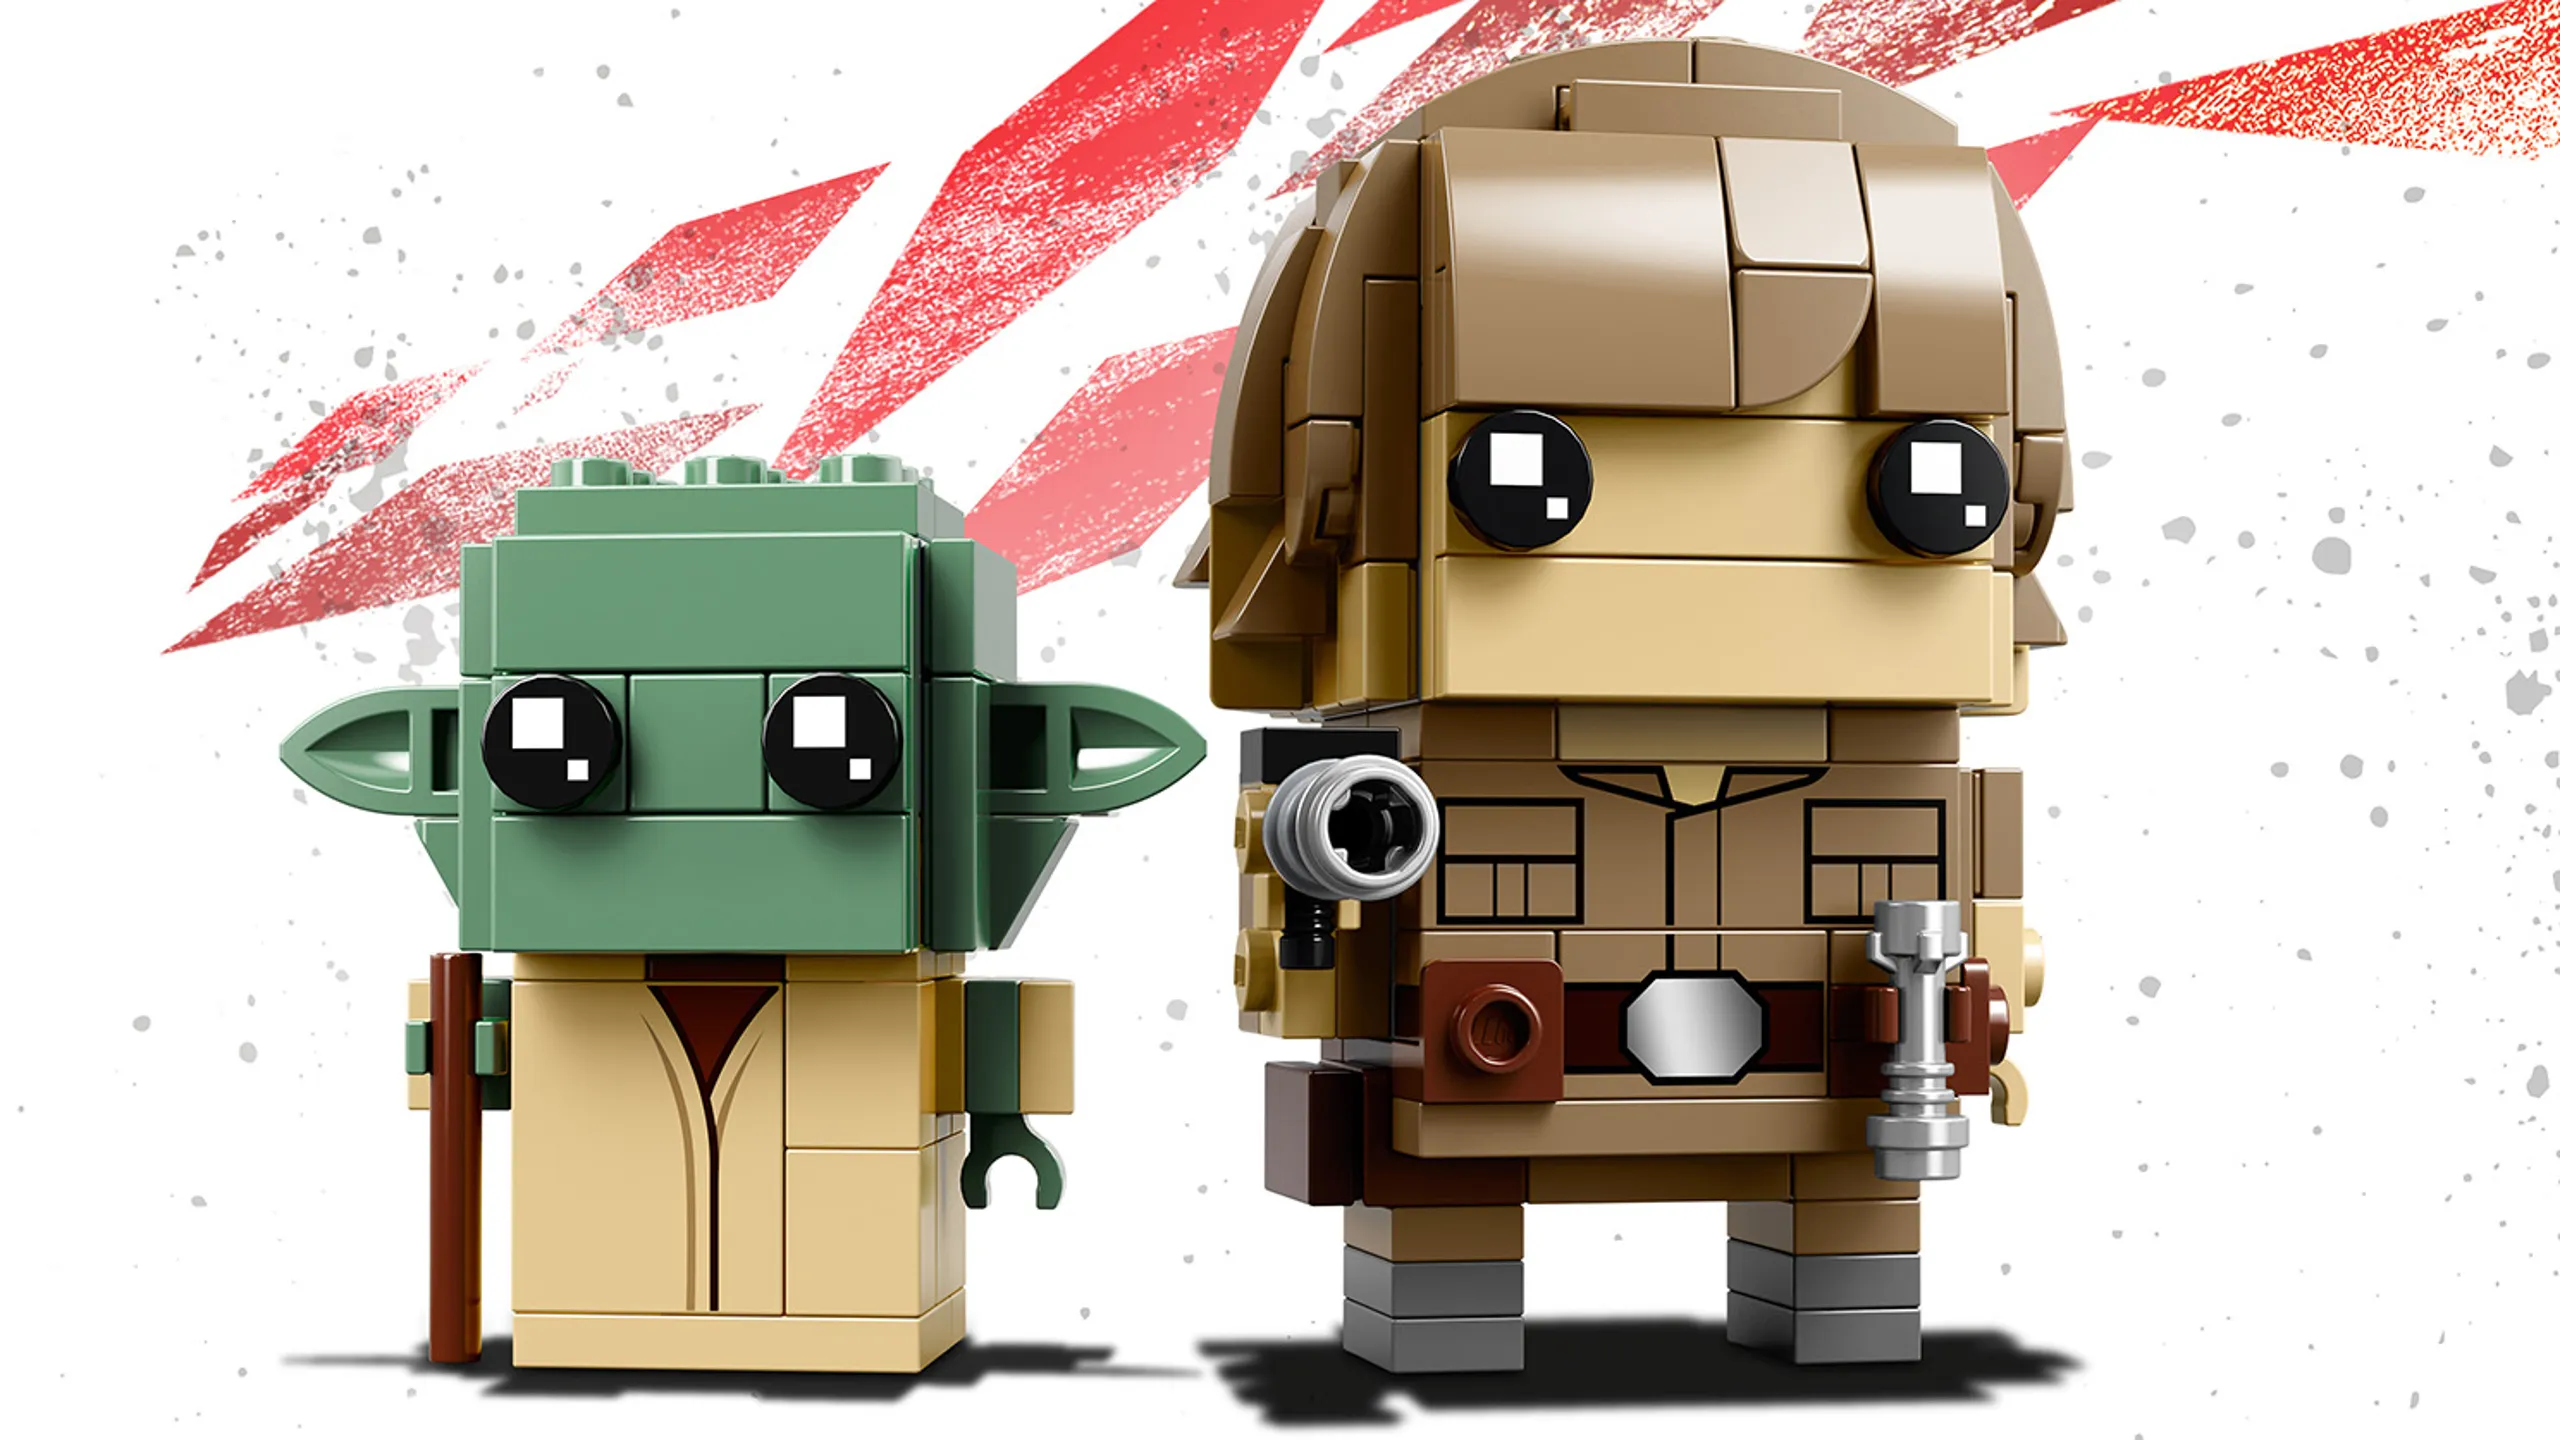 LEGO Brickheadz - 41627 Luke Skywalker & Yoda - Build LEGO Brickheadz version of these two characters from the movie Star Wars: Episode V The Empire Strikes Back and display them on individual baseplates.